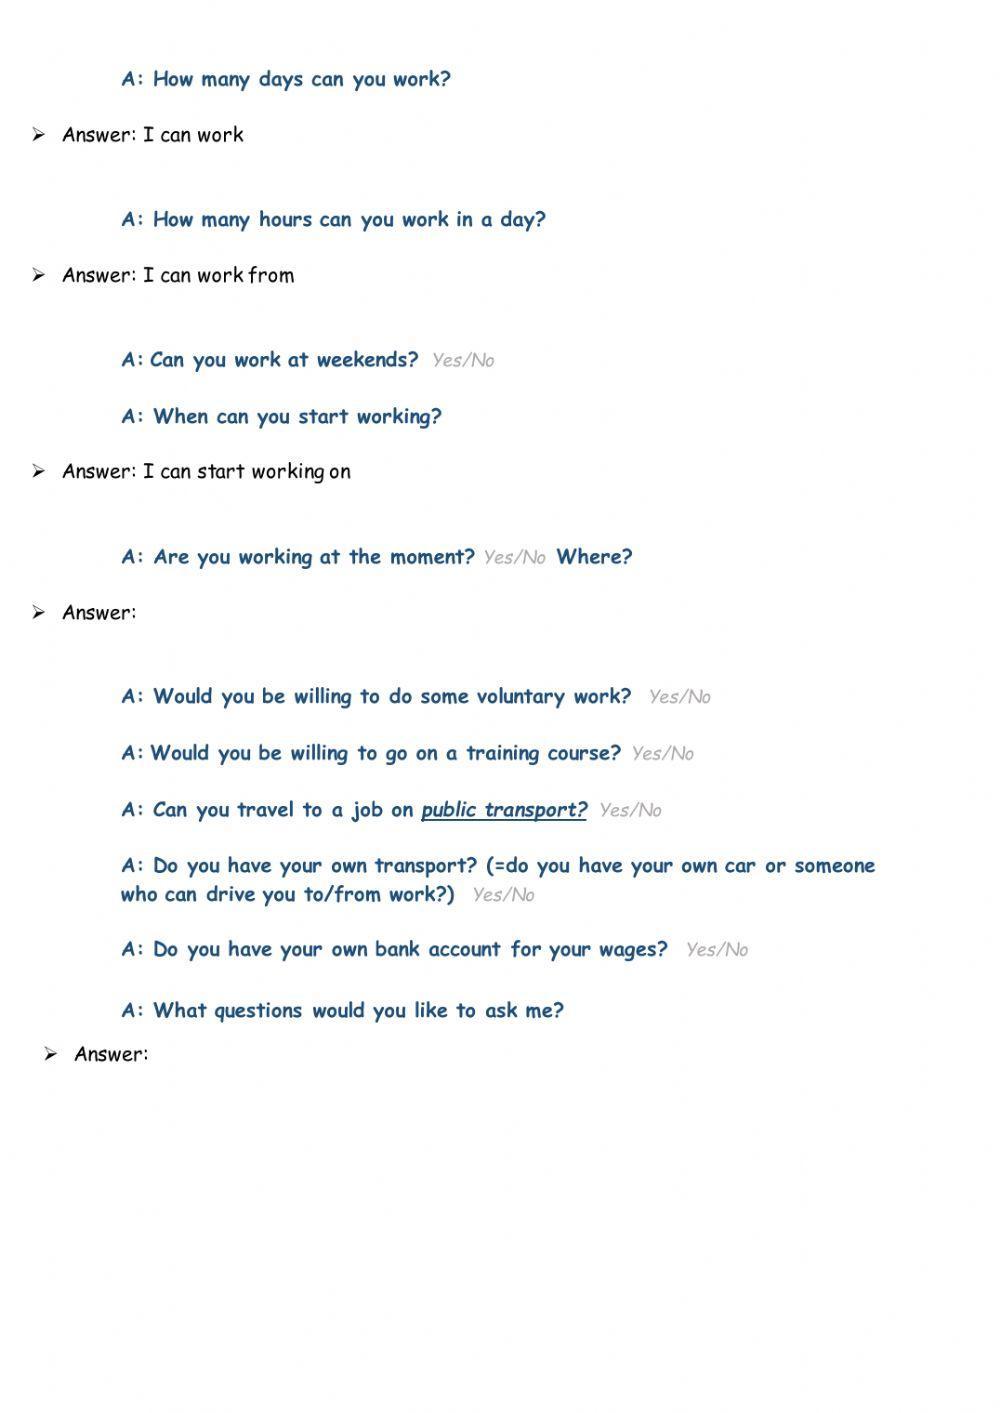 job advisor interview (role-play) question and answers writing activity